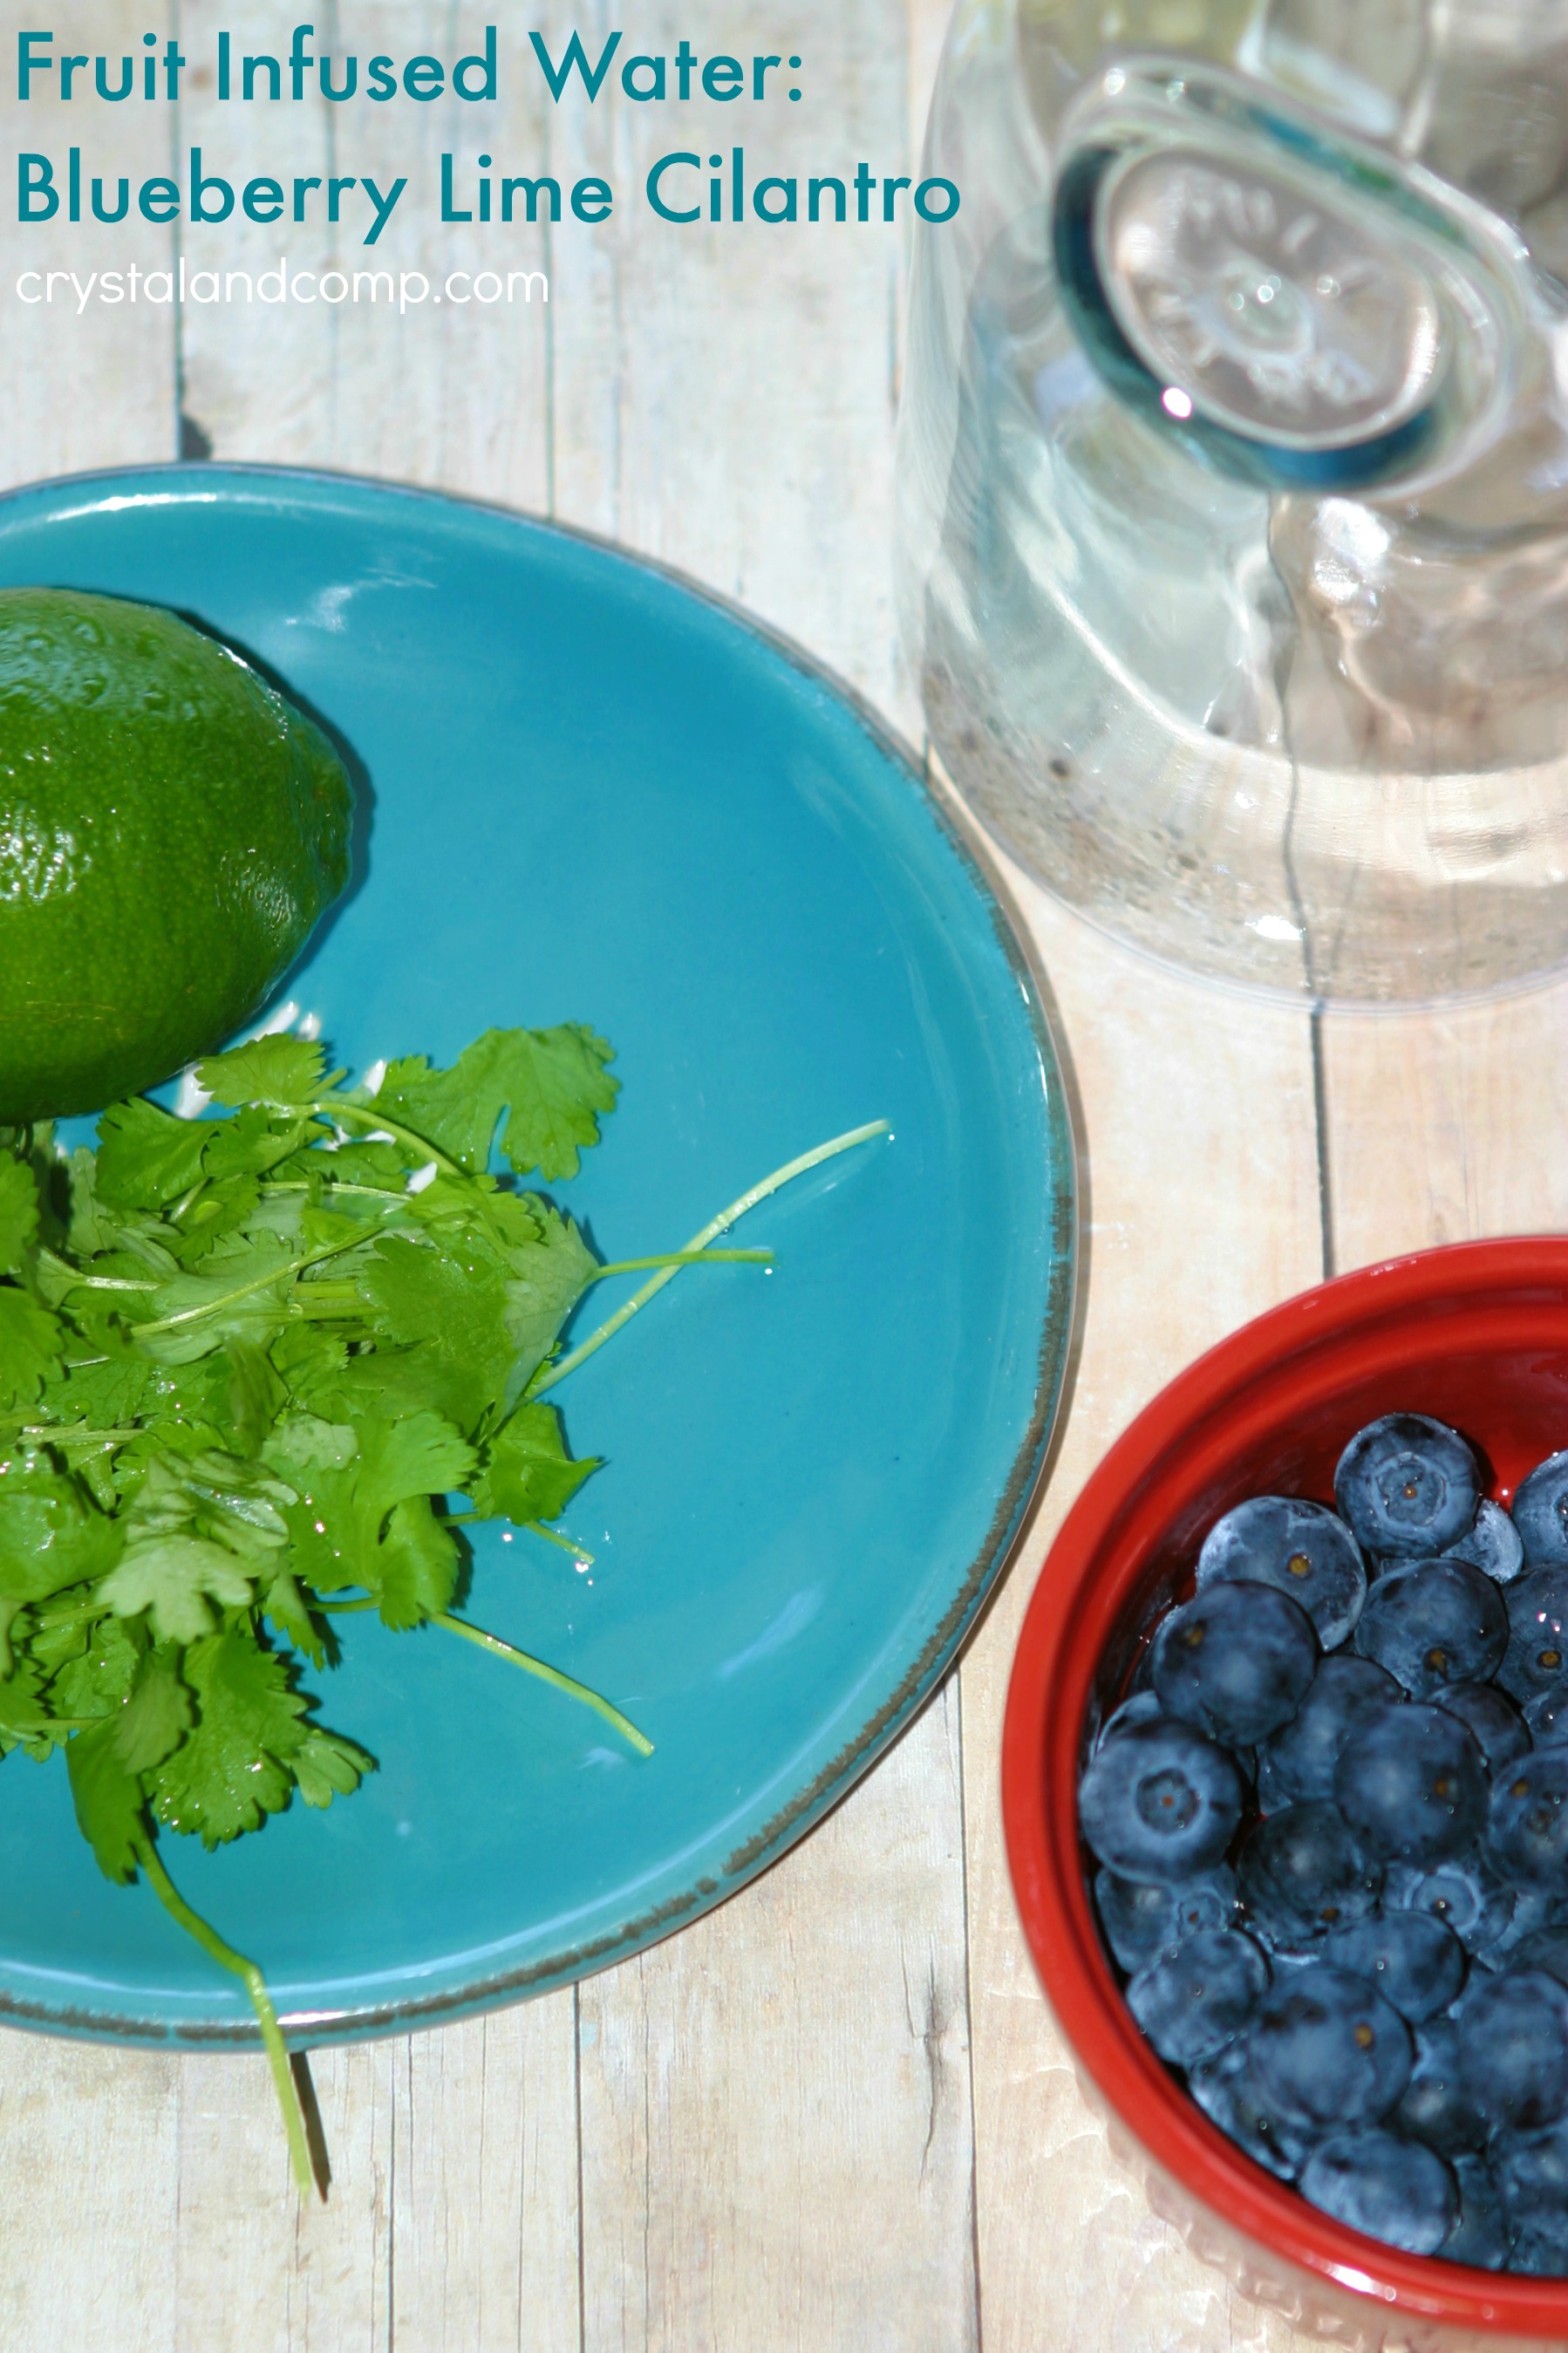 Fruit Infused Water: Blueberry Lime Cilantro